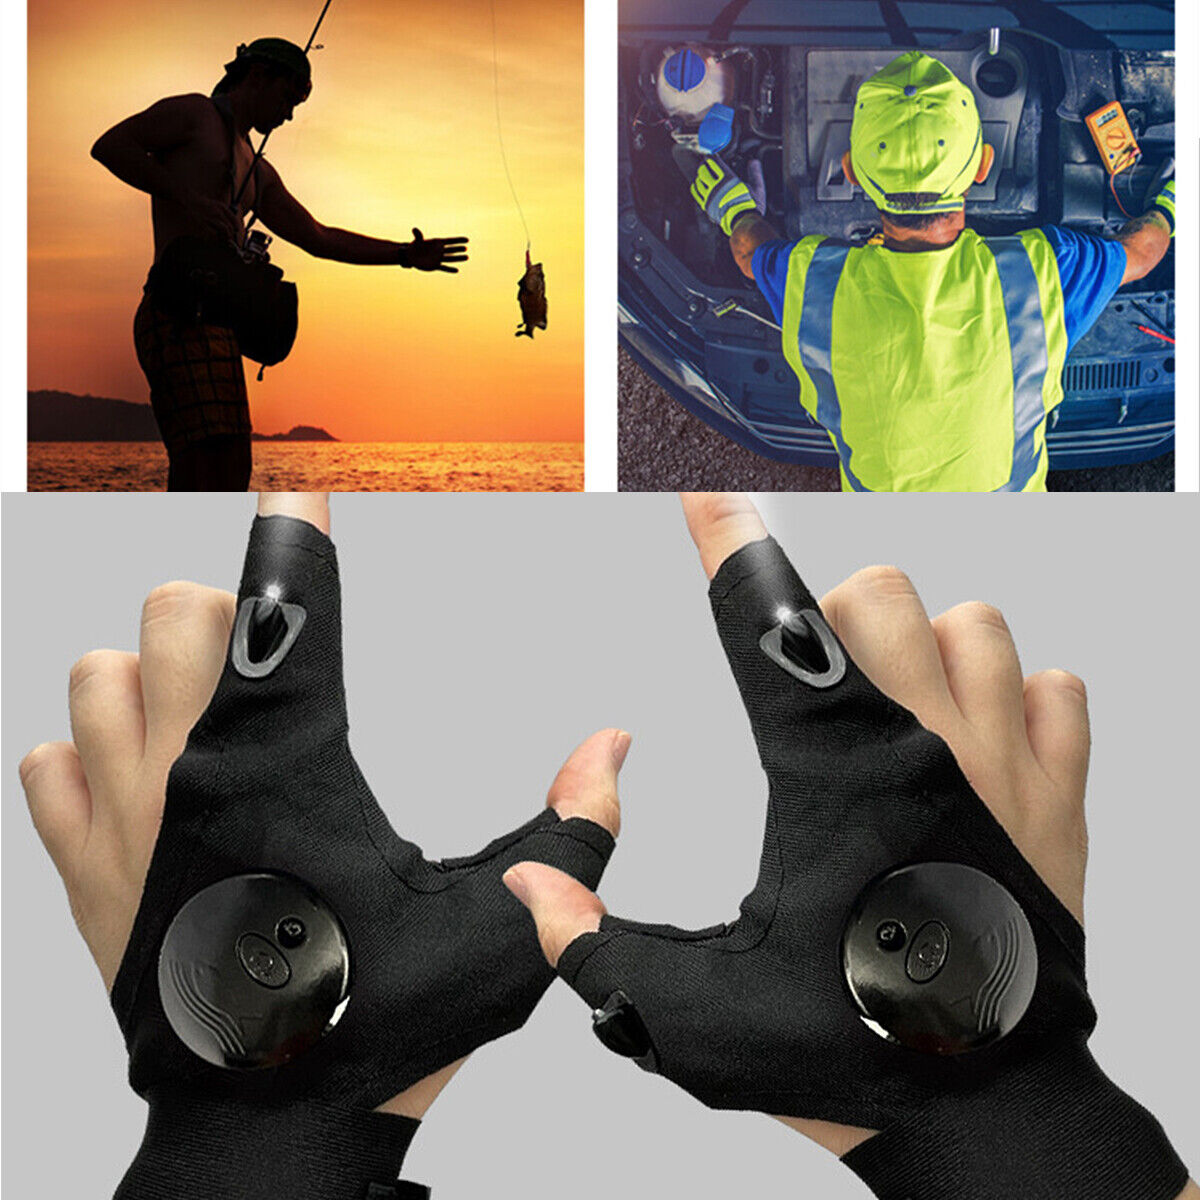 Pair Finger Gloves with LED Light Flashlight Tools Outdoor Gear Rescue Torch